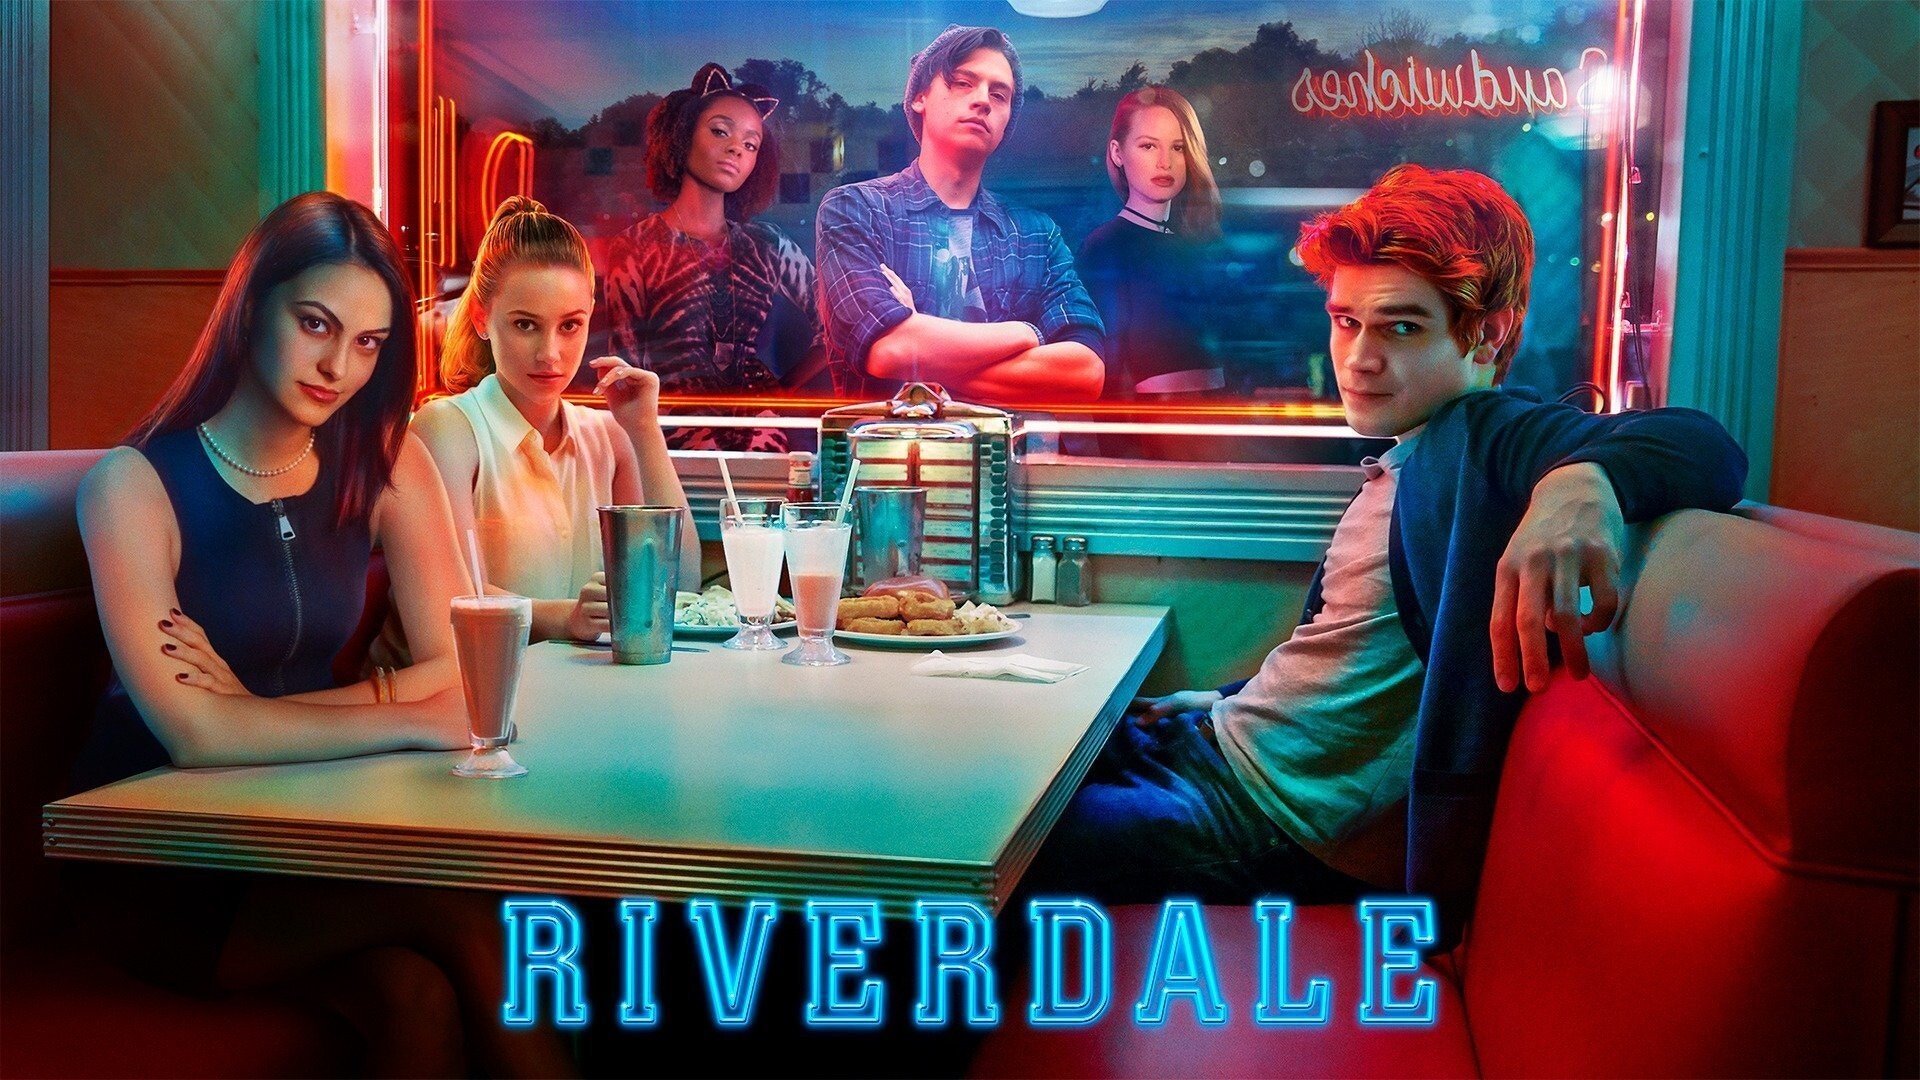 Riverdale (TV Series): The jock Archie, The girl next door Betty, The new girl Veronica, The outcast Jughead. 1920x1080 Full HD Wallpaper.